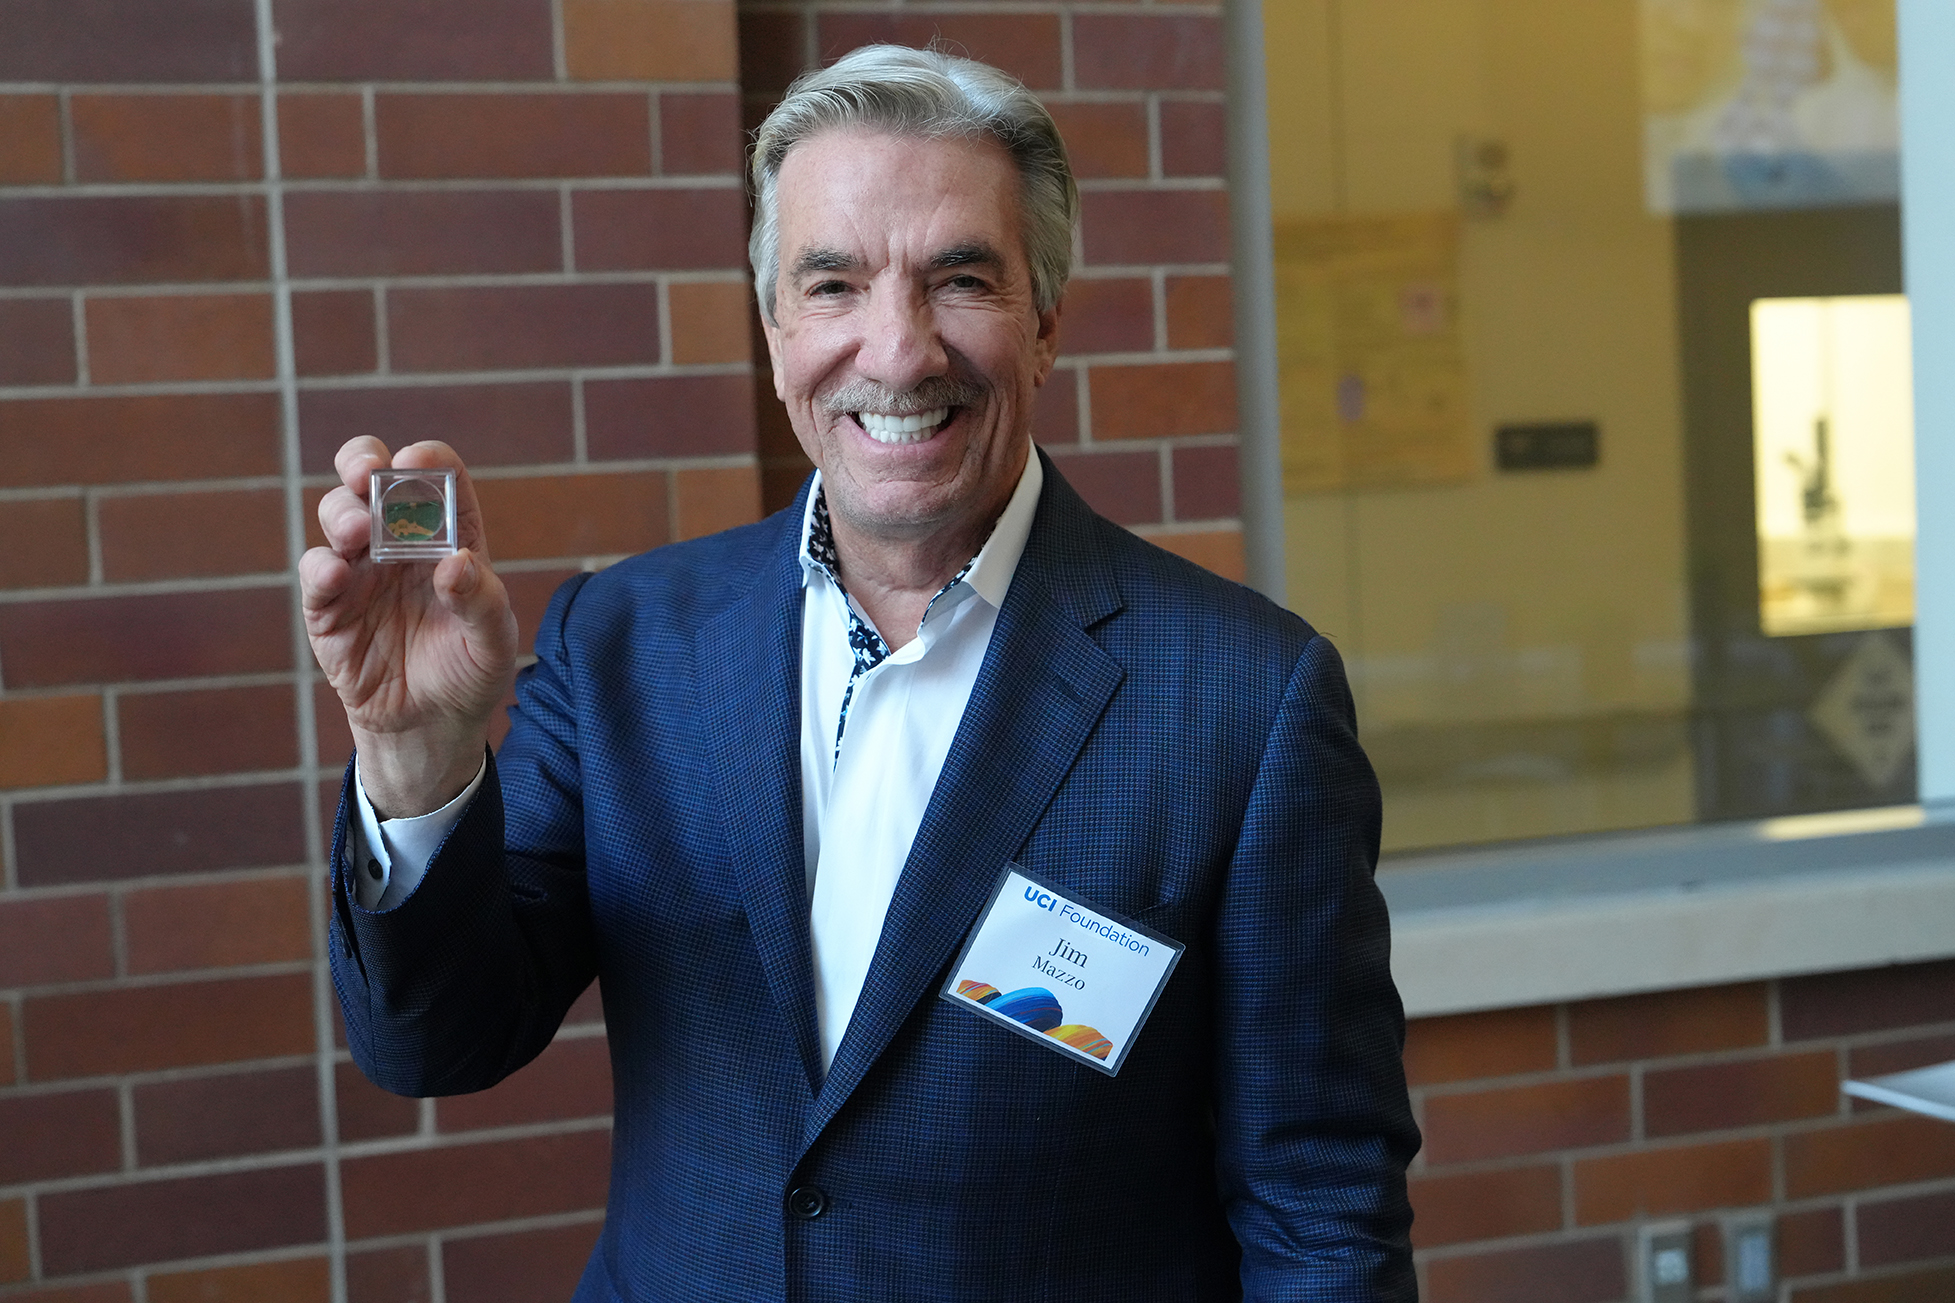 Jim Mazzo shows off a micro-Anteater sensor made in INRF. According to Hung Cao, “This Anteater cannot eat ants but it can sense toxic gases and liquids.”